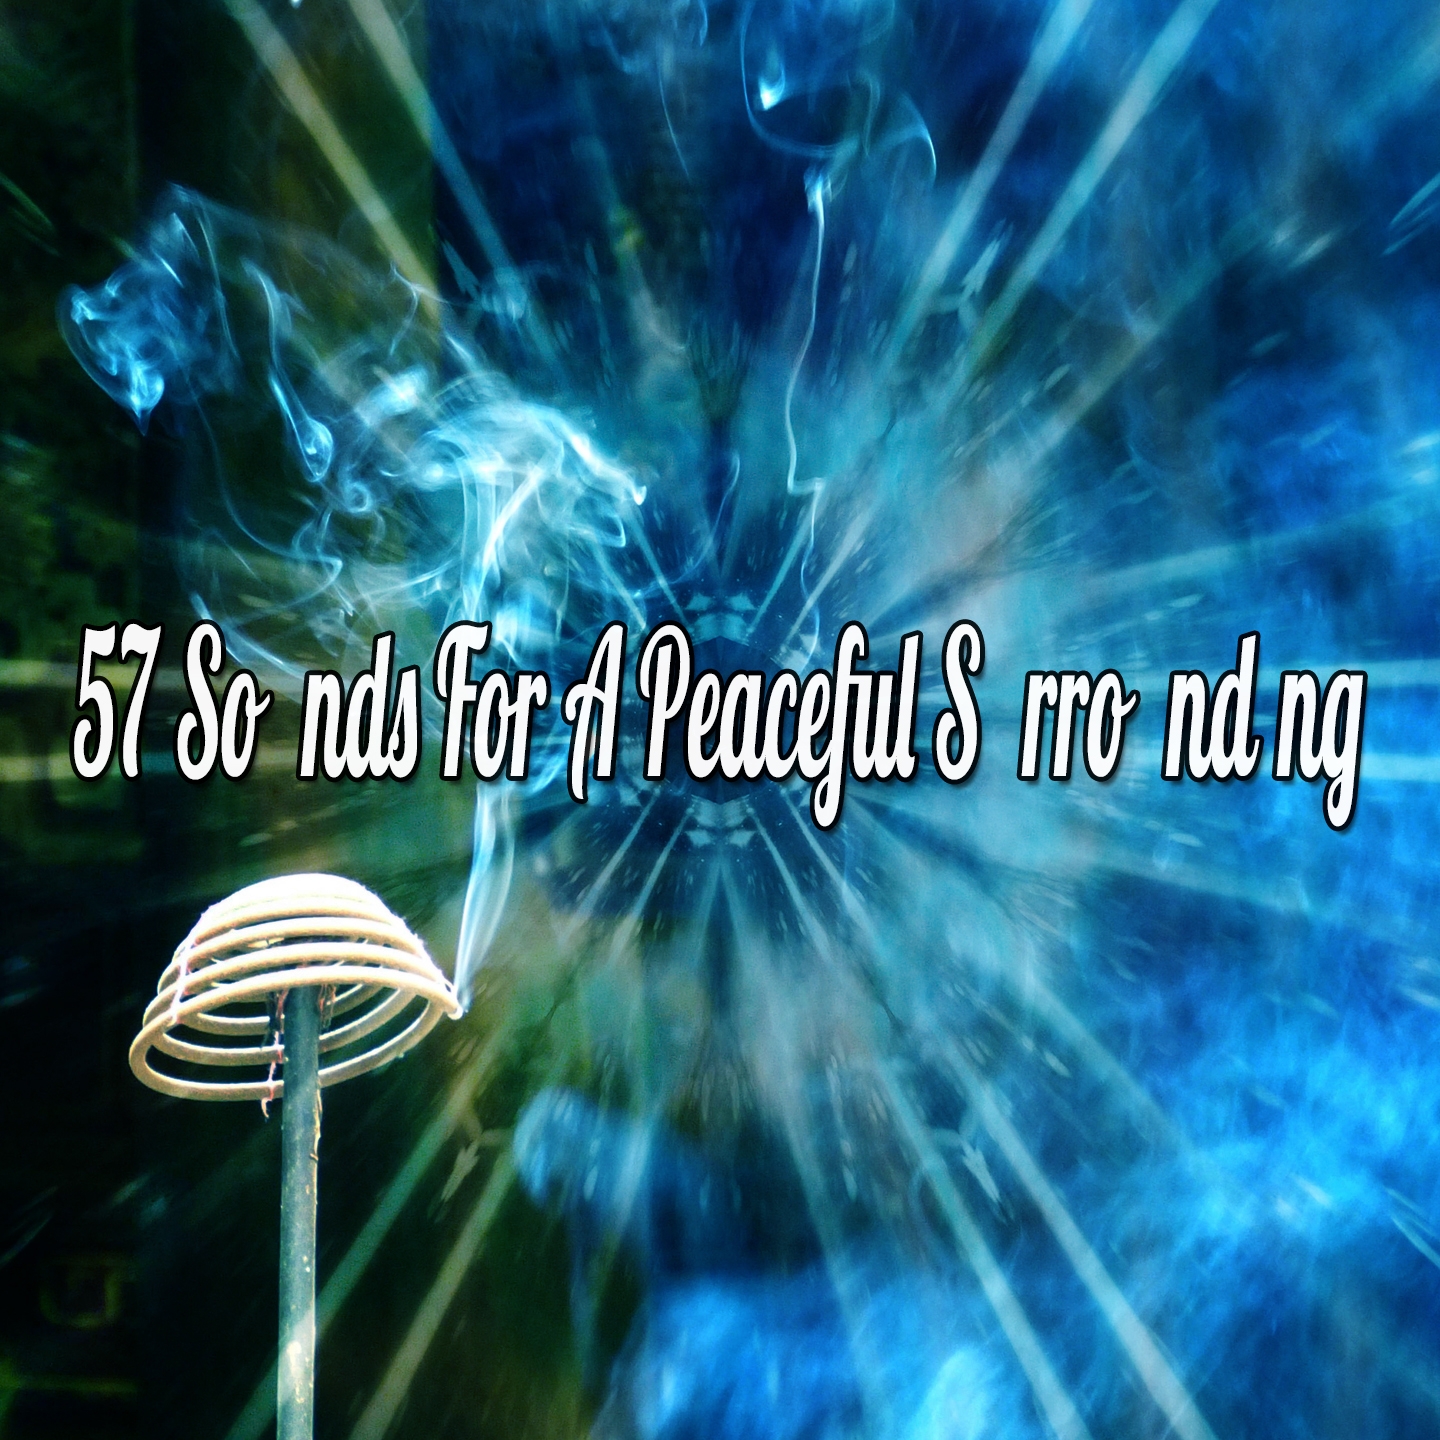 57 Sounds For A Peaceful Surrounding